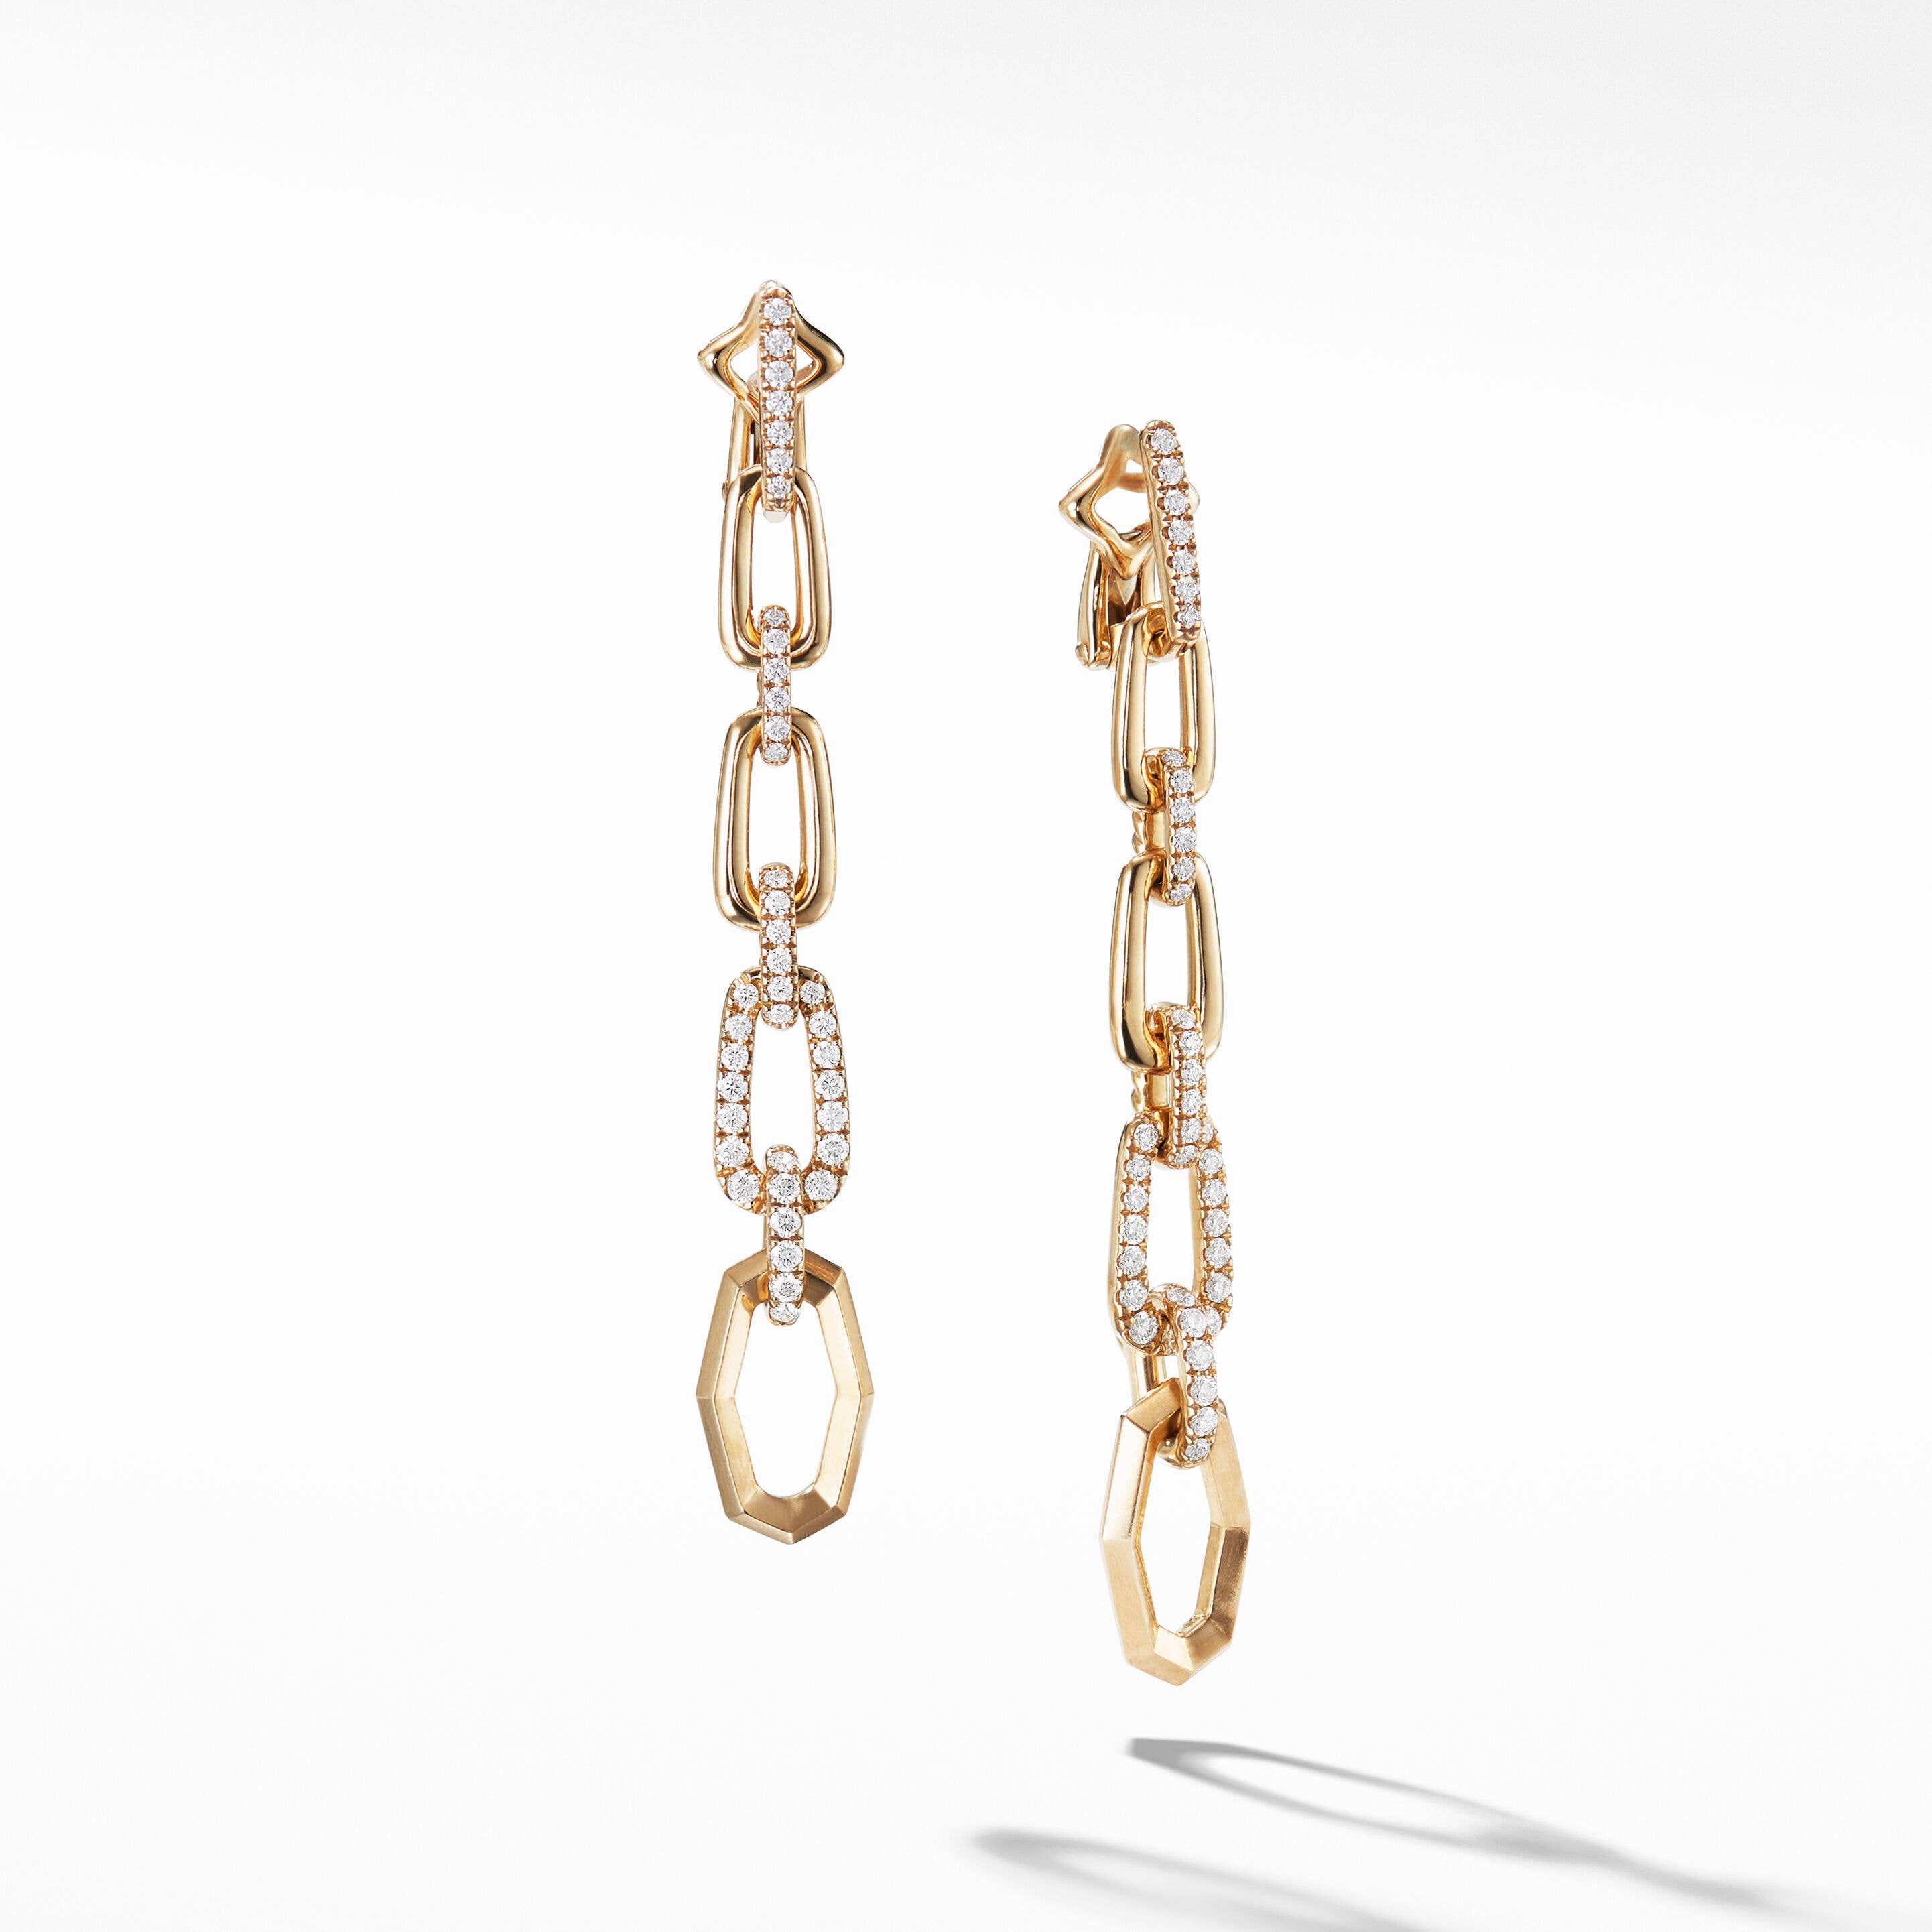 Stax Chain Link Convertible Drop Earrings in 18K Yellow Gold with Pavé Diamonds